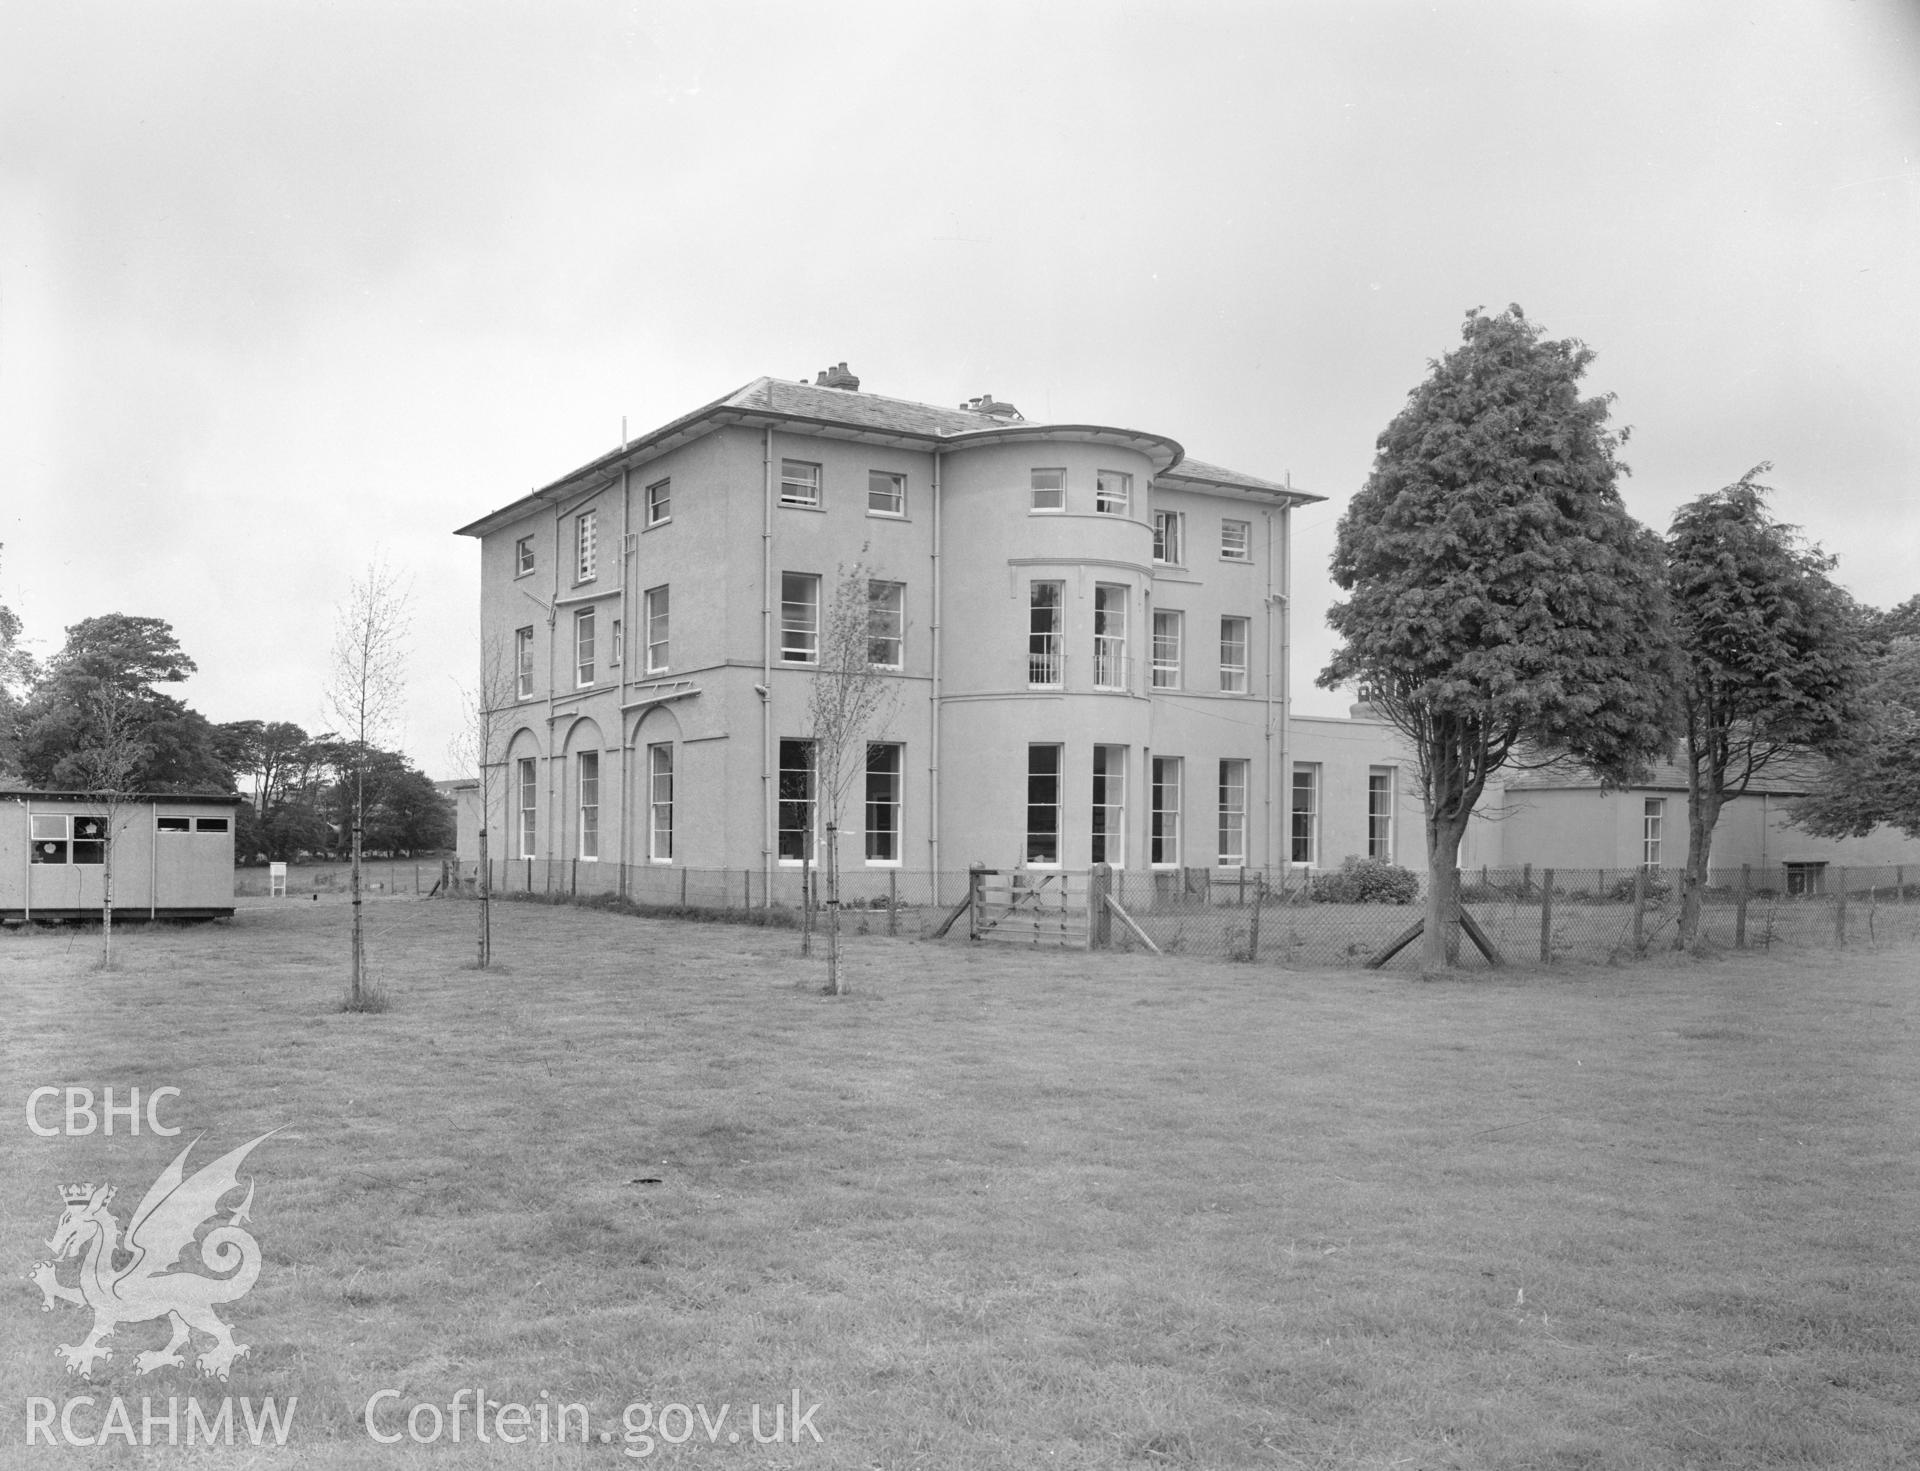 Black and white acetate negative showing exterior view of Stout Hall.